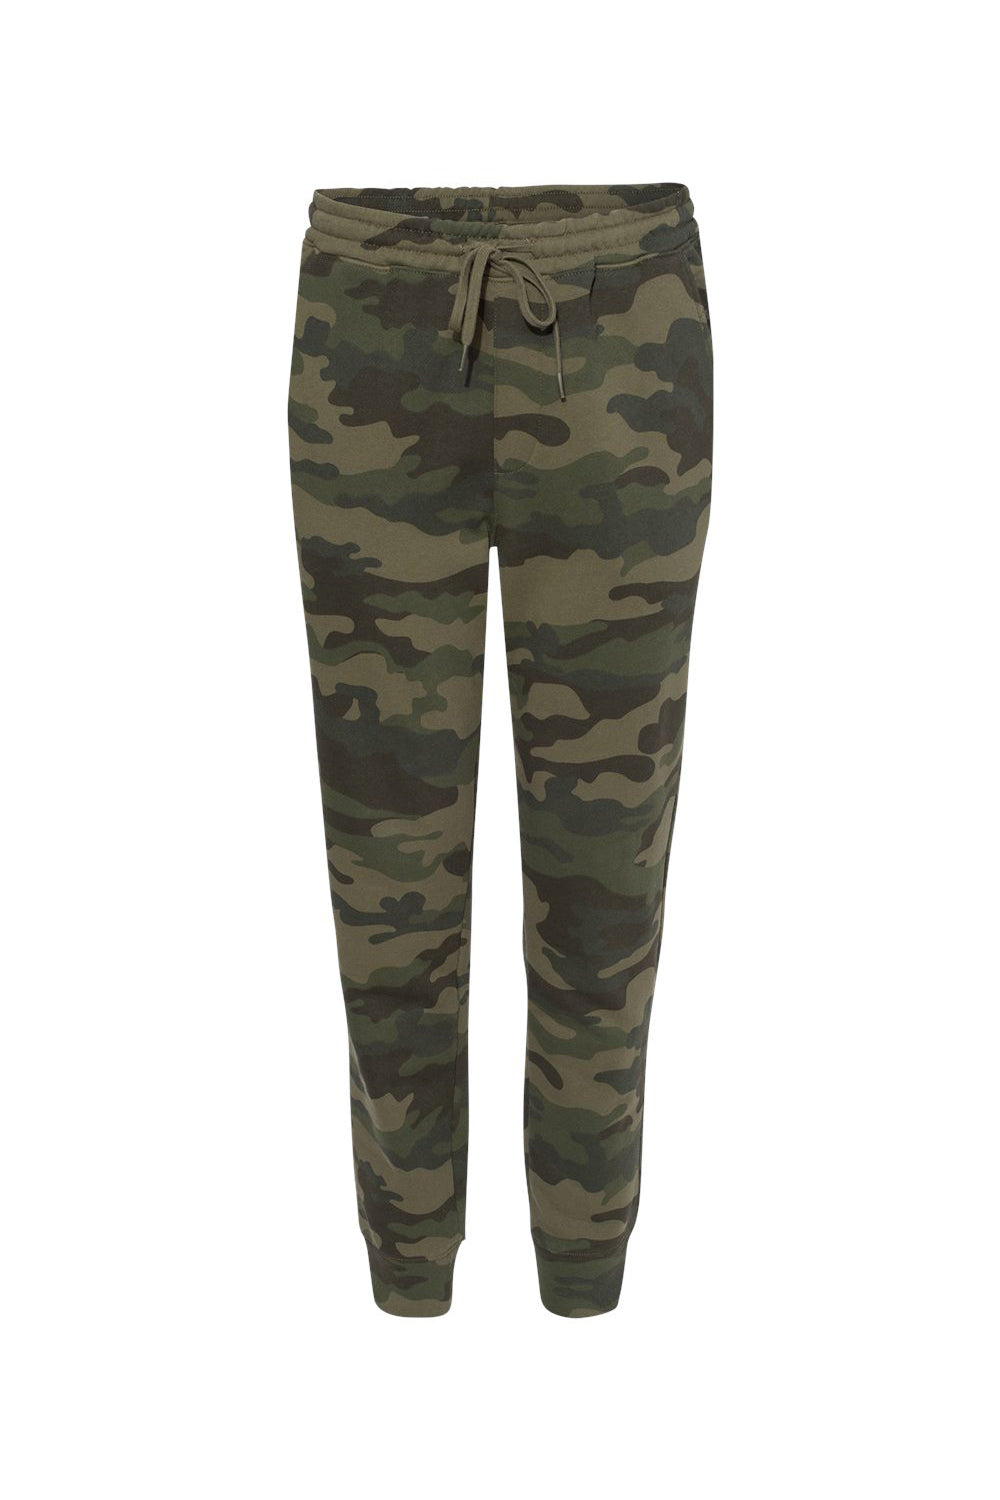 Independent Trading Co. IND20PNT Mens Fleece Sweatpants w/ Pockets Forest Green Camo Flat Front